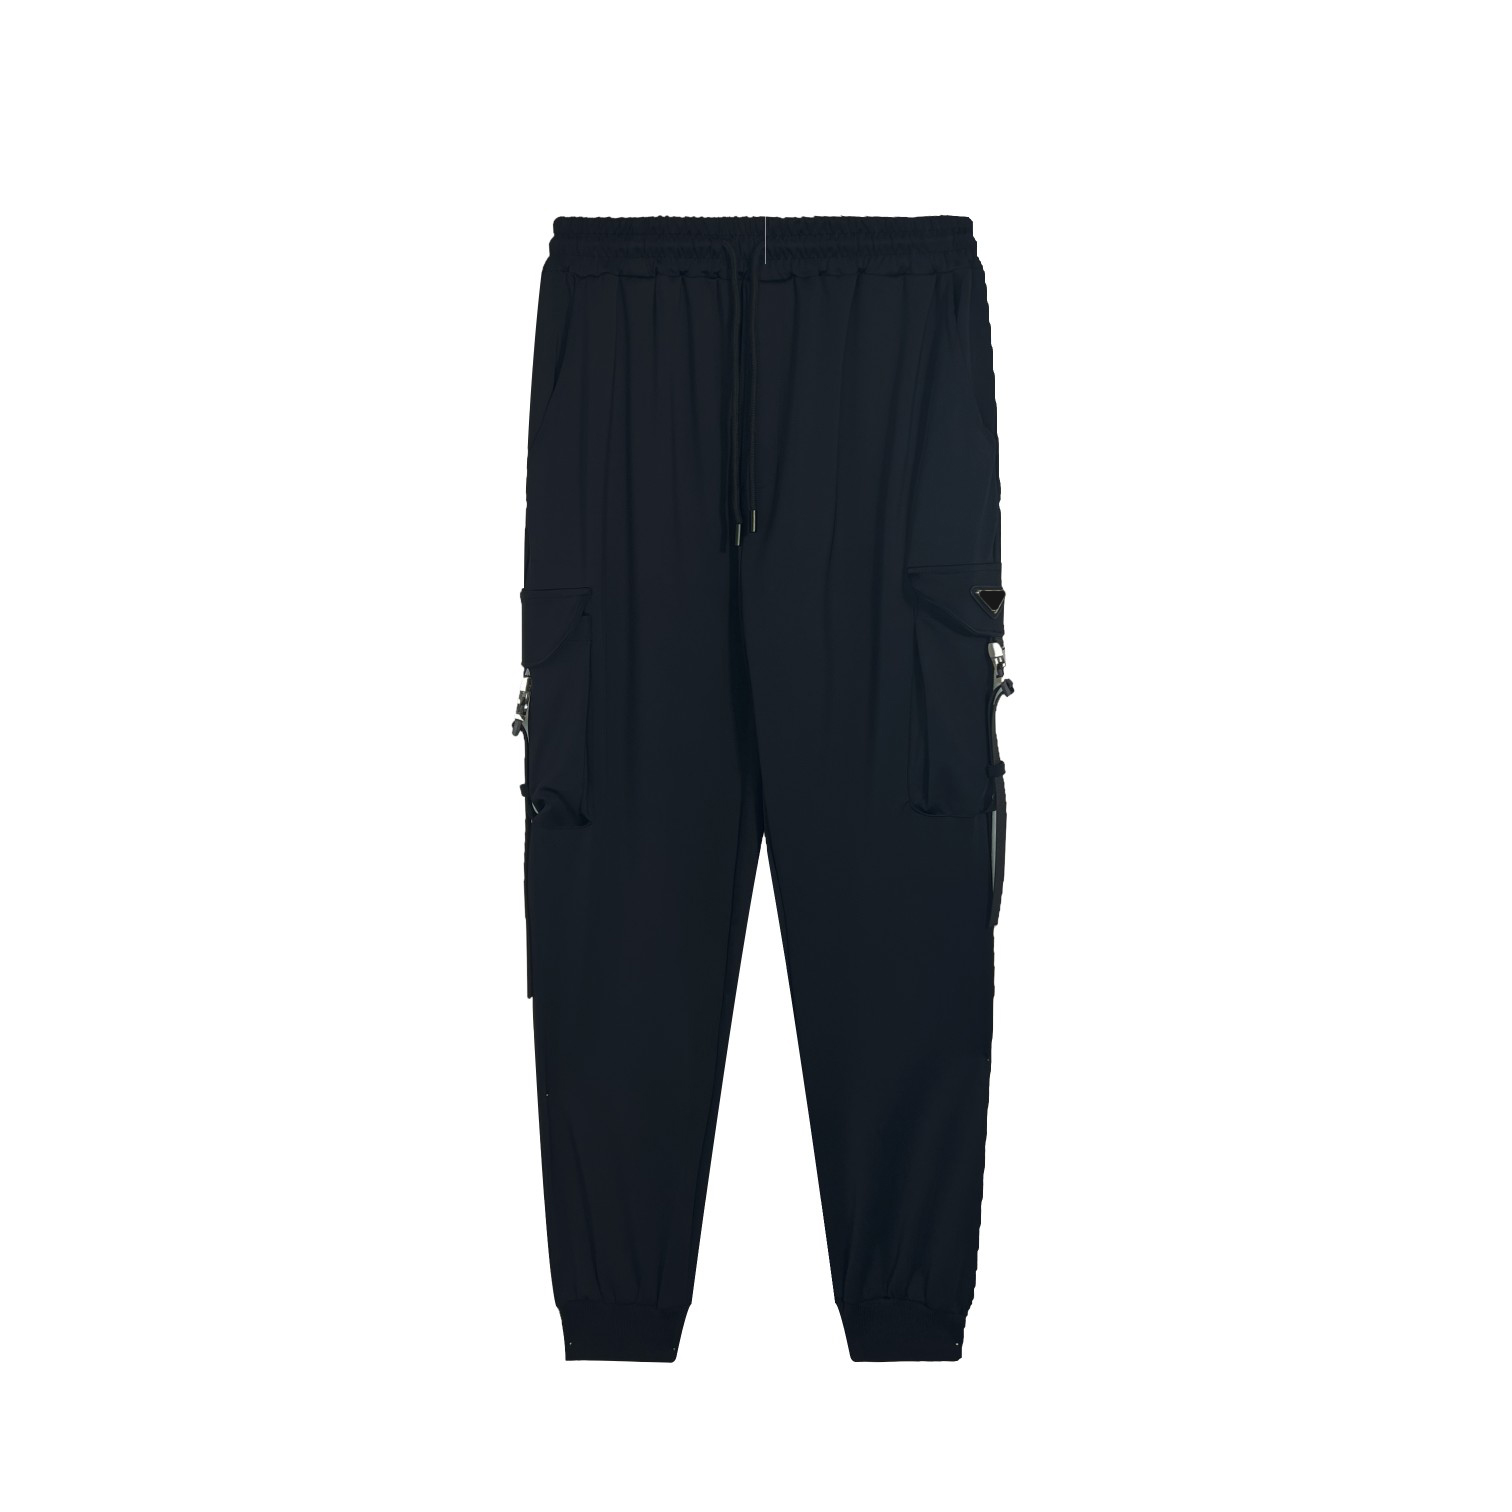 

22ss spring pants men running fashion sweatpants loose Imported woven waterproof nylon fabric Feel smooth soft and delicate Ribbed cuffs asian size black pants